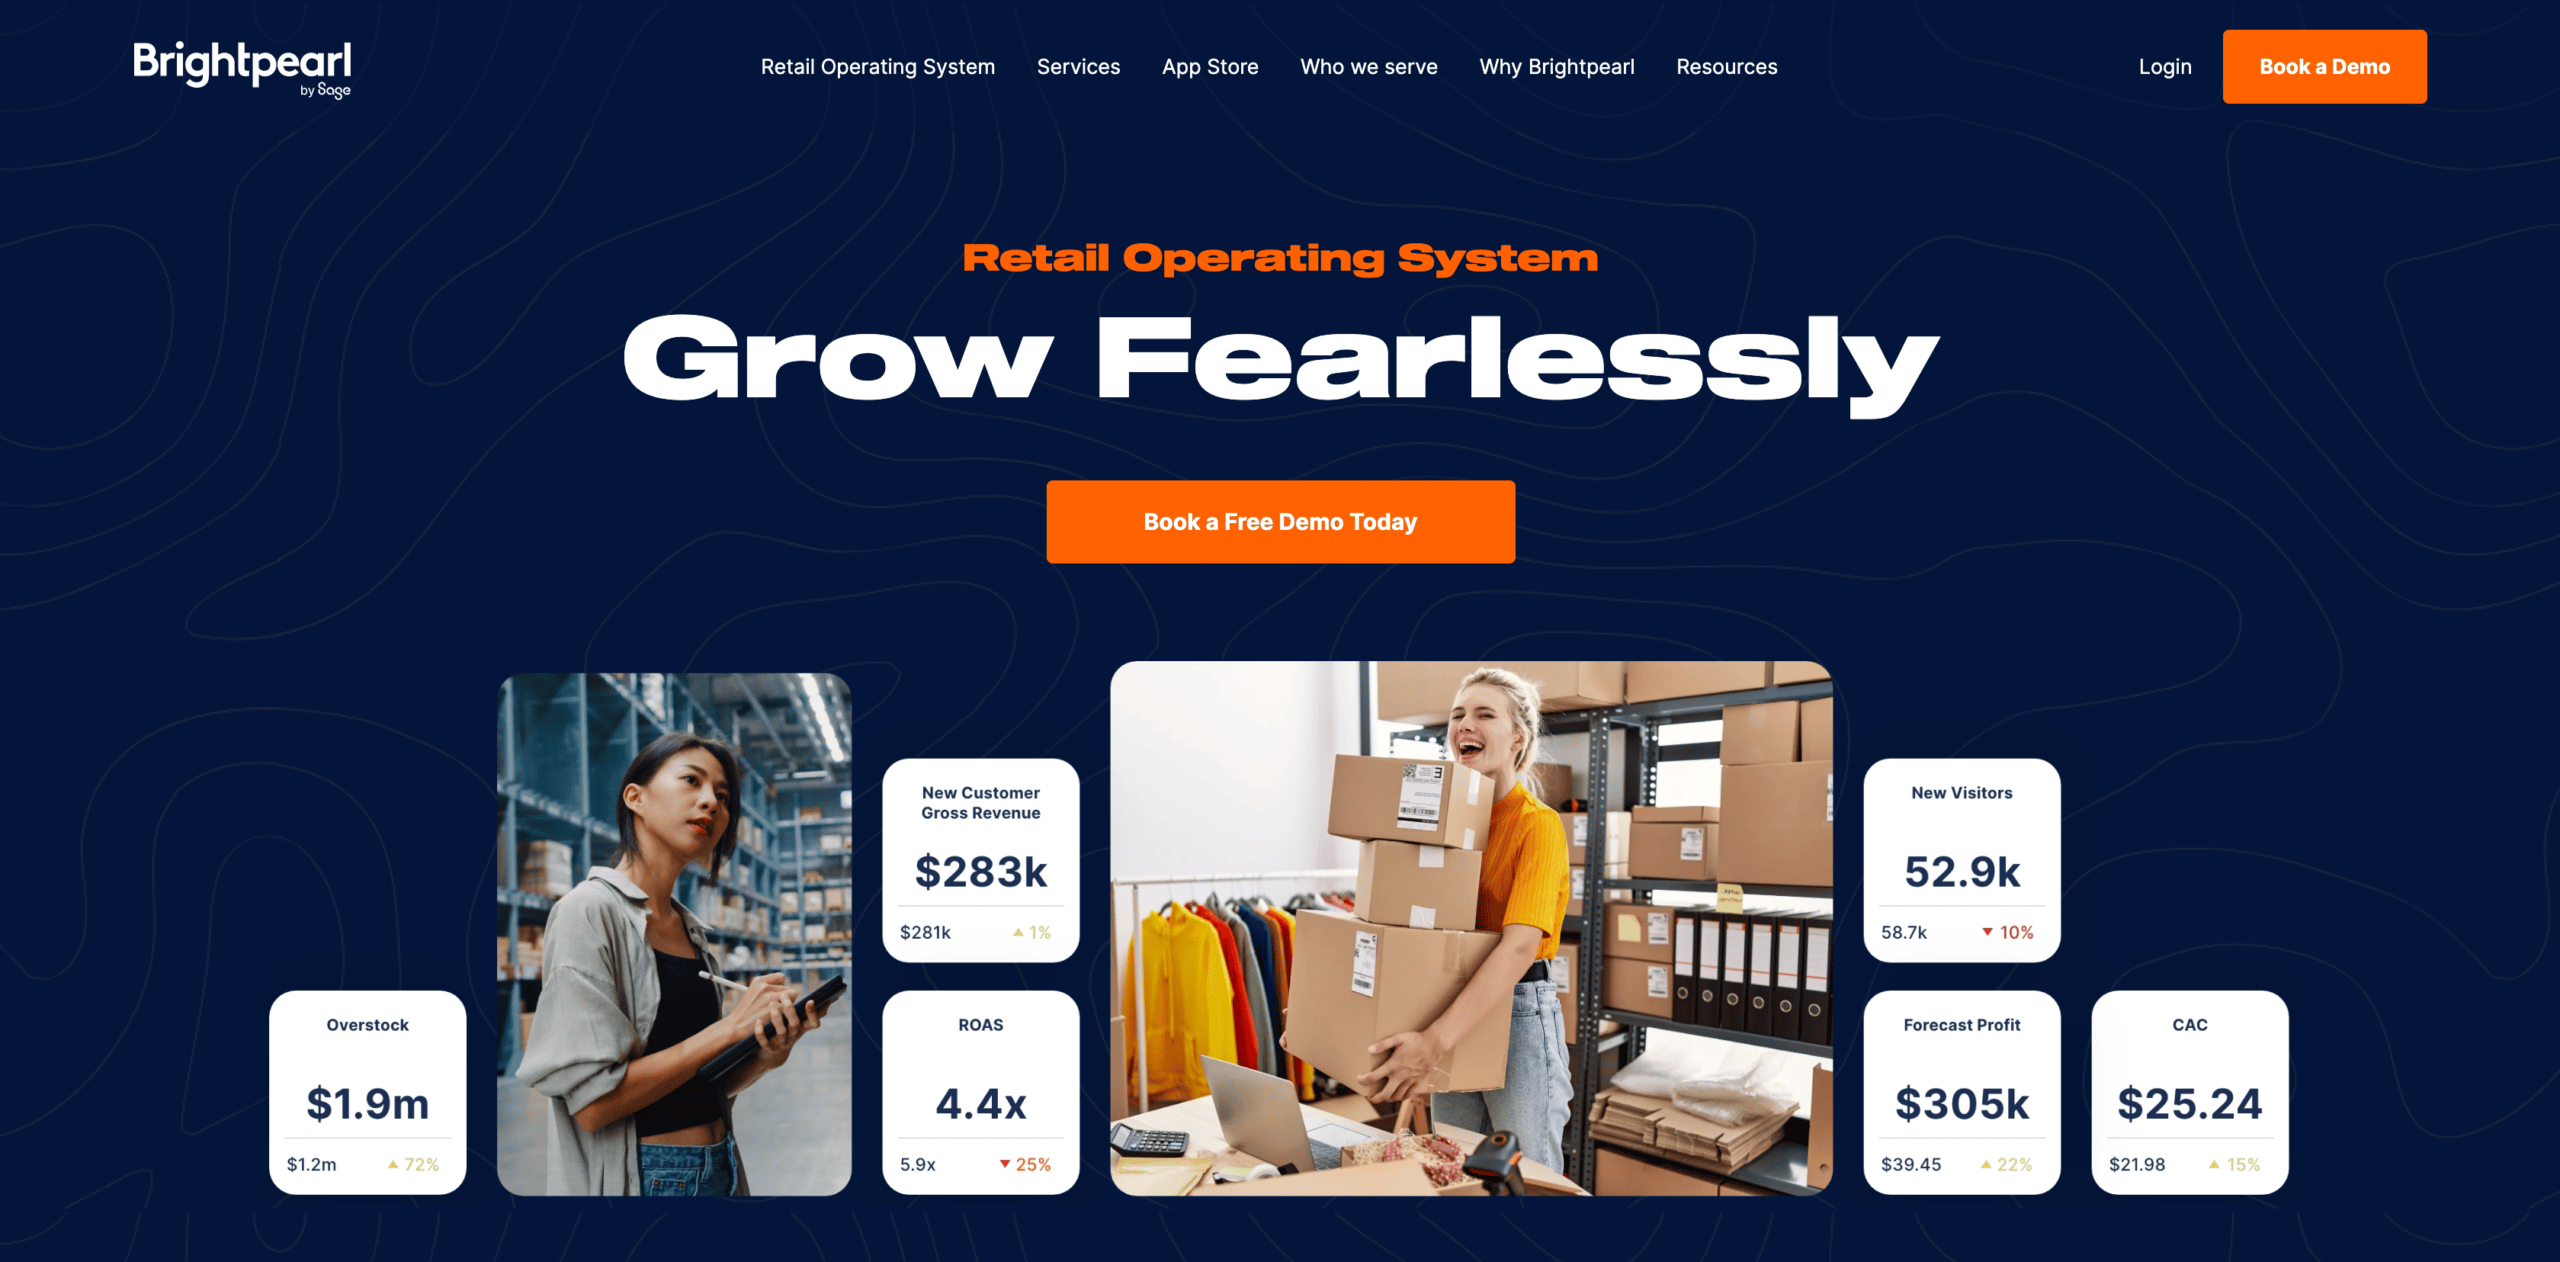 Brightpearl; a retail operating system